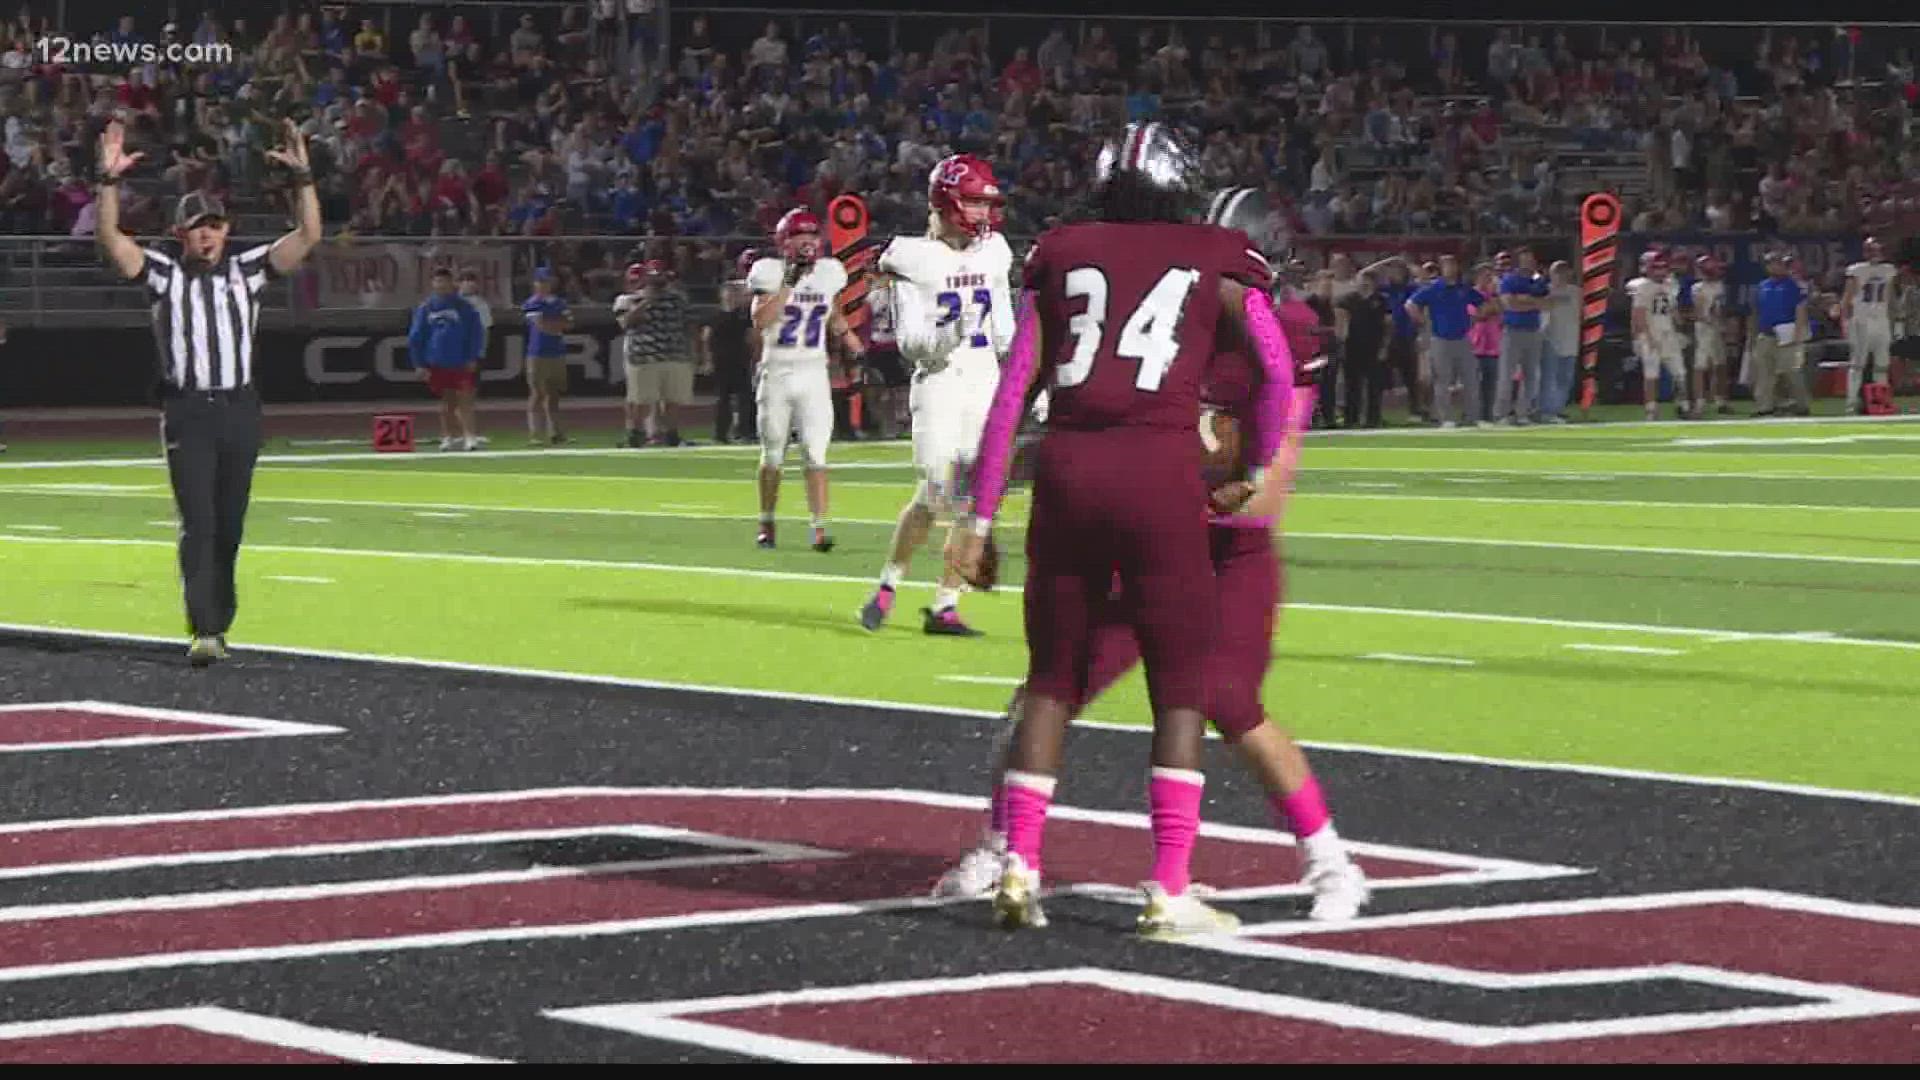 Red Mountain hands Mountain View their first loss of the season, 20-3.